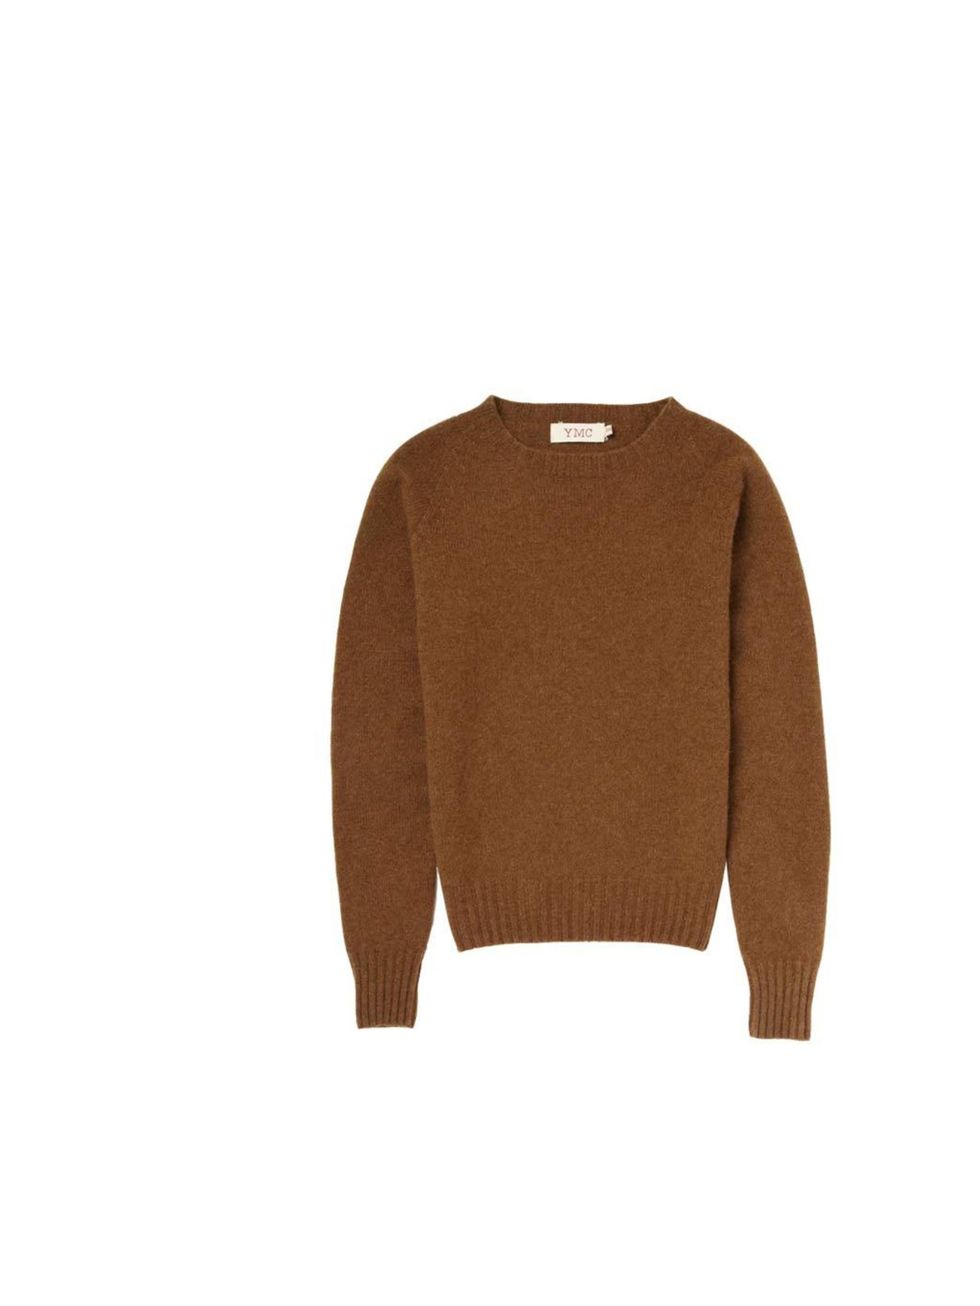 <p>Cooler days have the ELLE team stockpiling sweaters - Art Director Miette Johnson has her eye on this tobacco crew neck.</p><p><a href="http://www.youmustcreate.com/products/aw13-ymc-knits-tees-sweats/cashwool-crew-10/">YMC</a> jumper, £210</p>